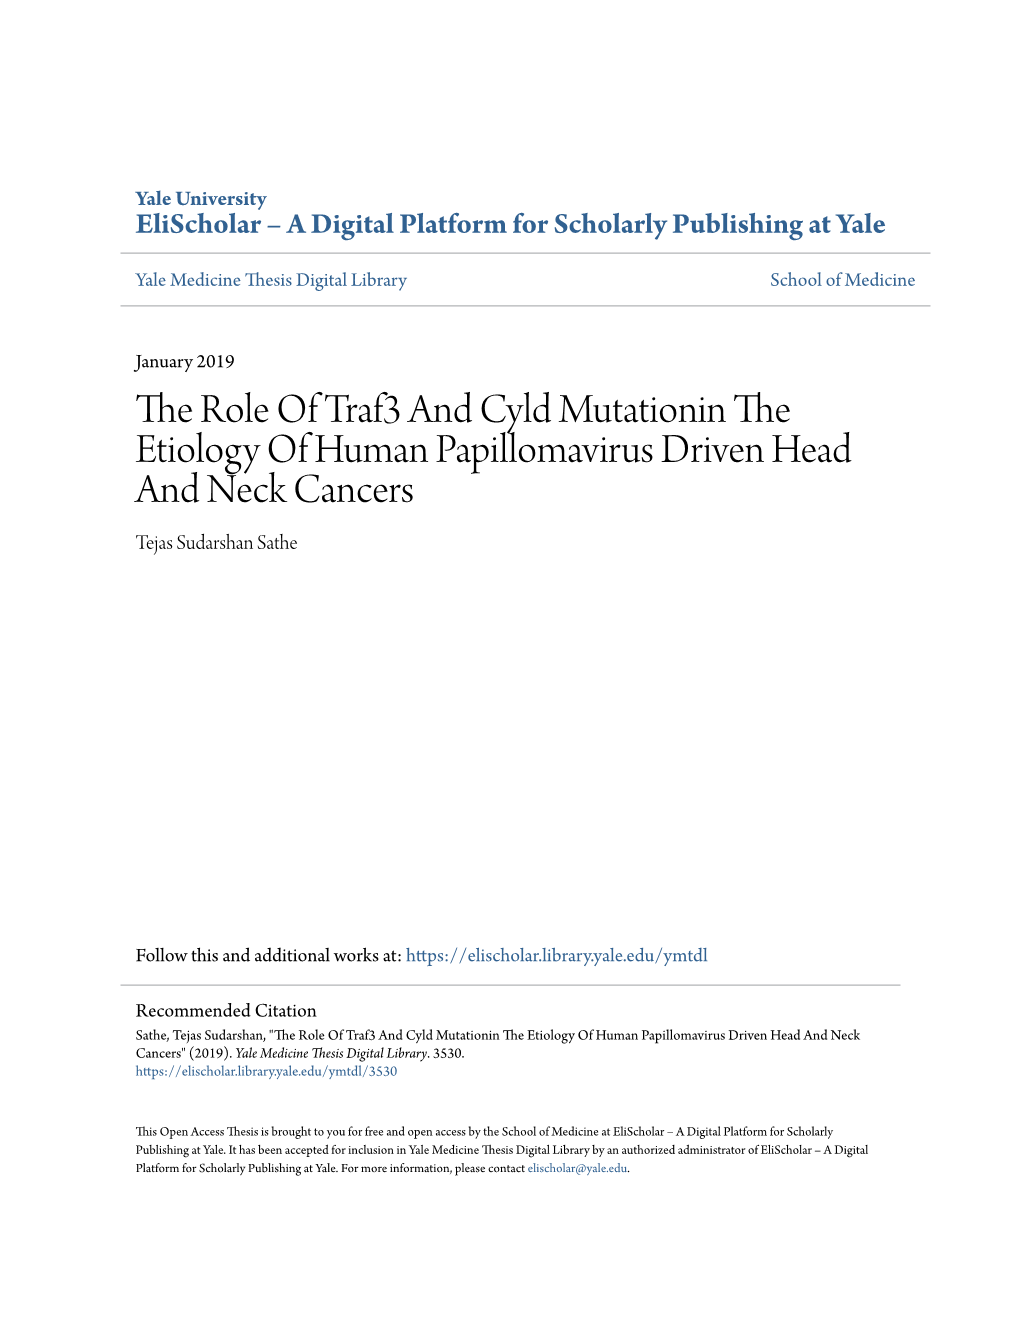 The Role of Traf3 and Cyld Mutationin the Etiology of Human Papillomavirus Driven Head and Neck Cancers Tejas Sudarshan Sathe